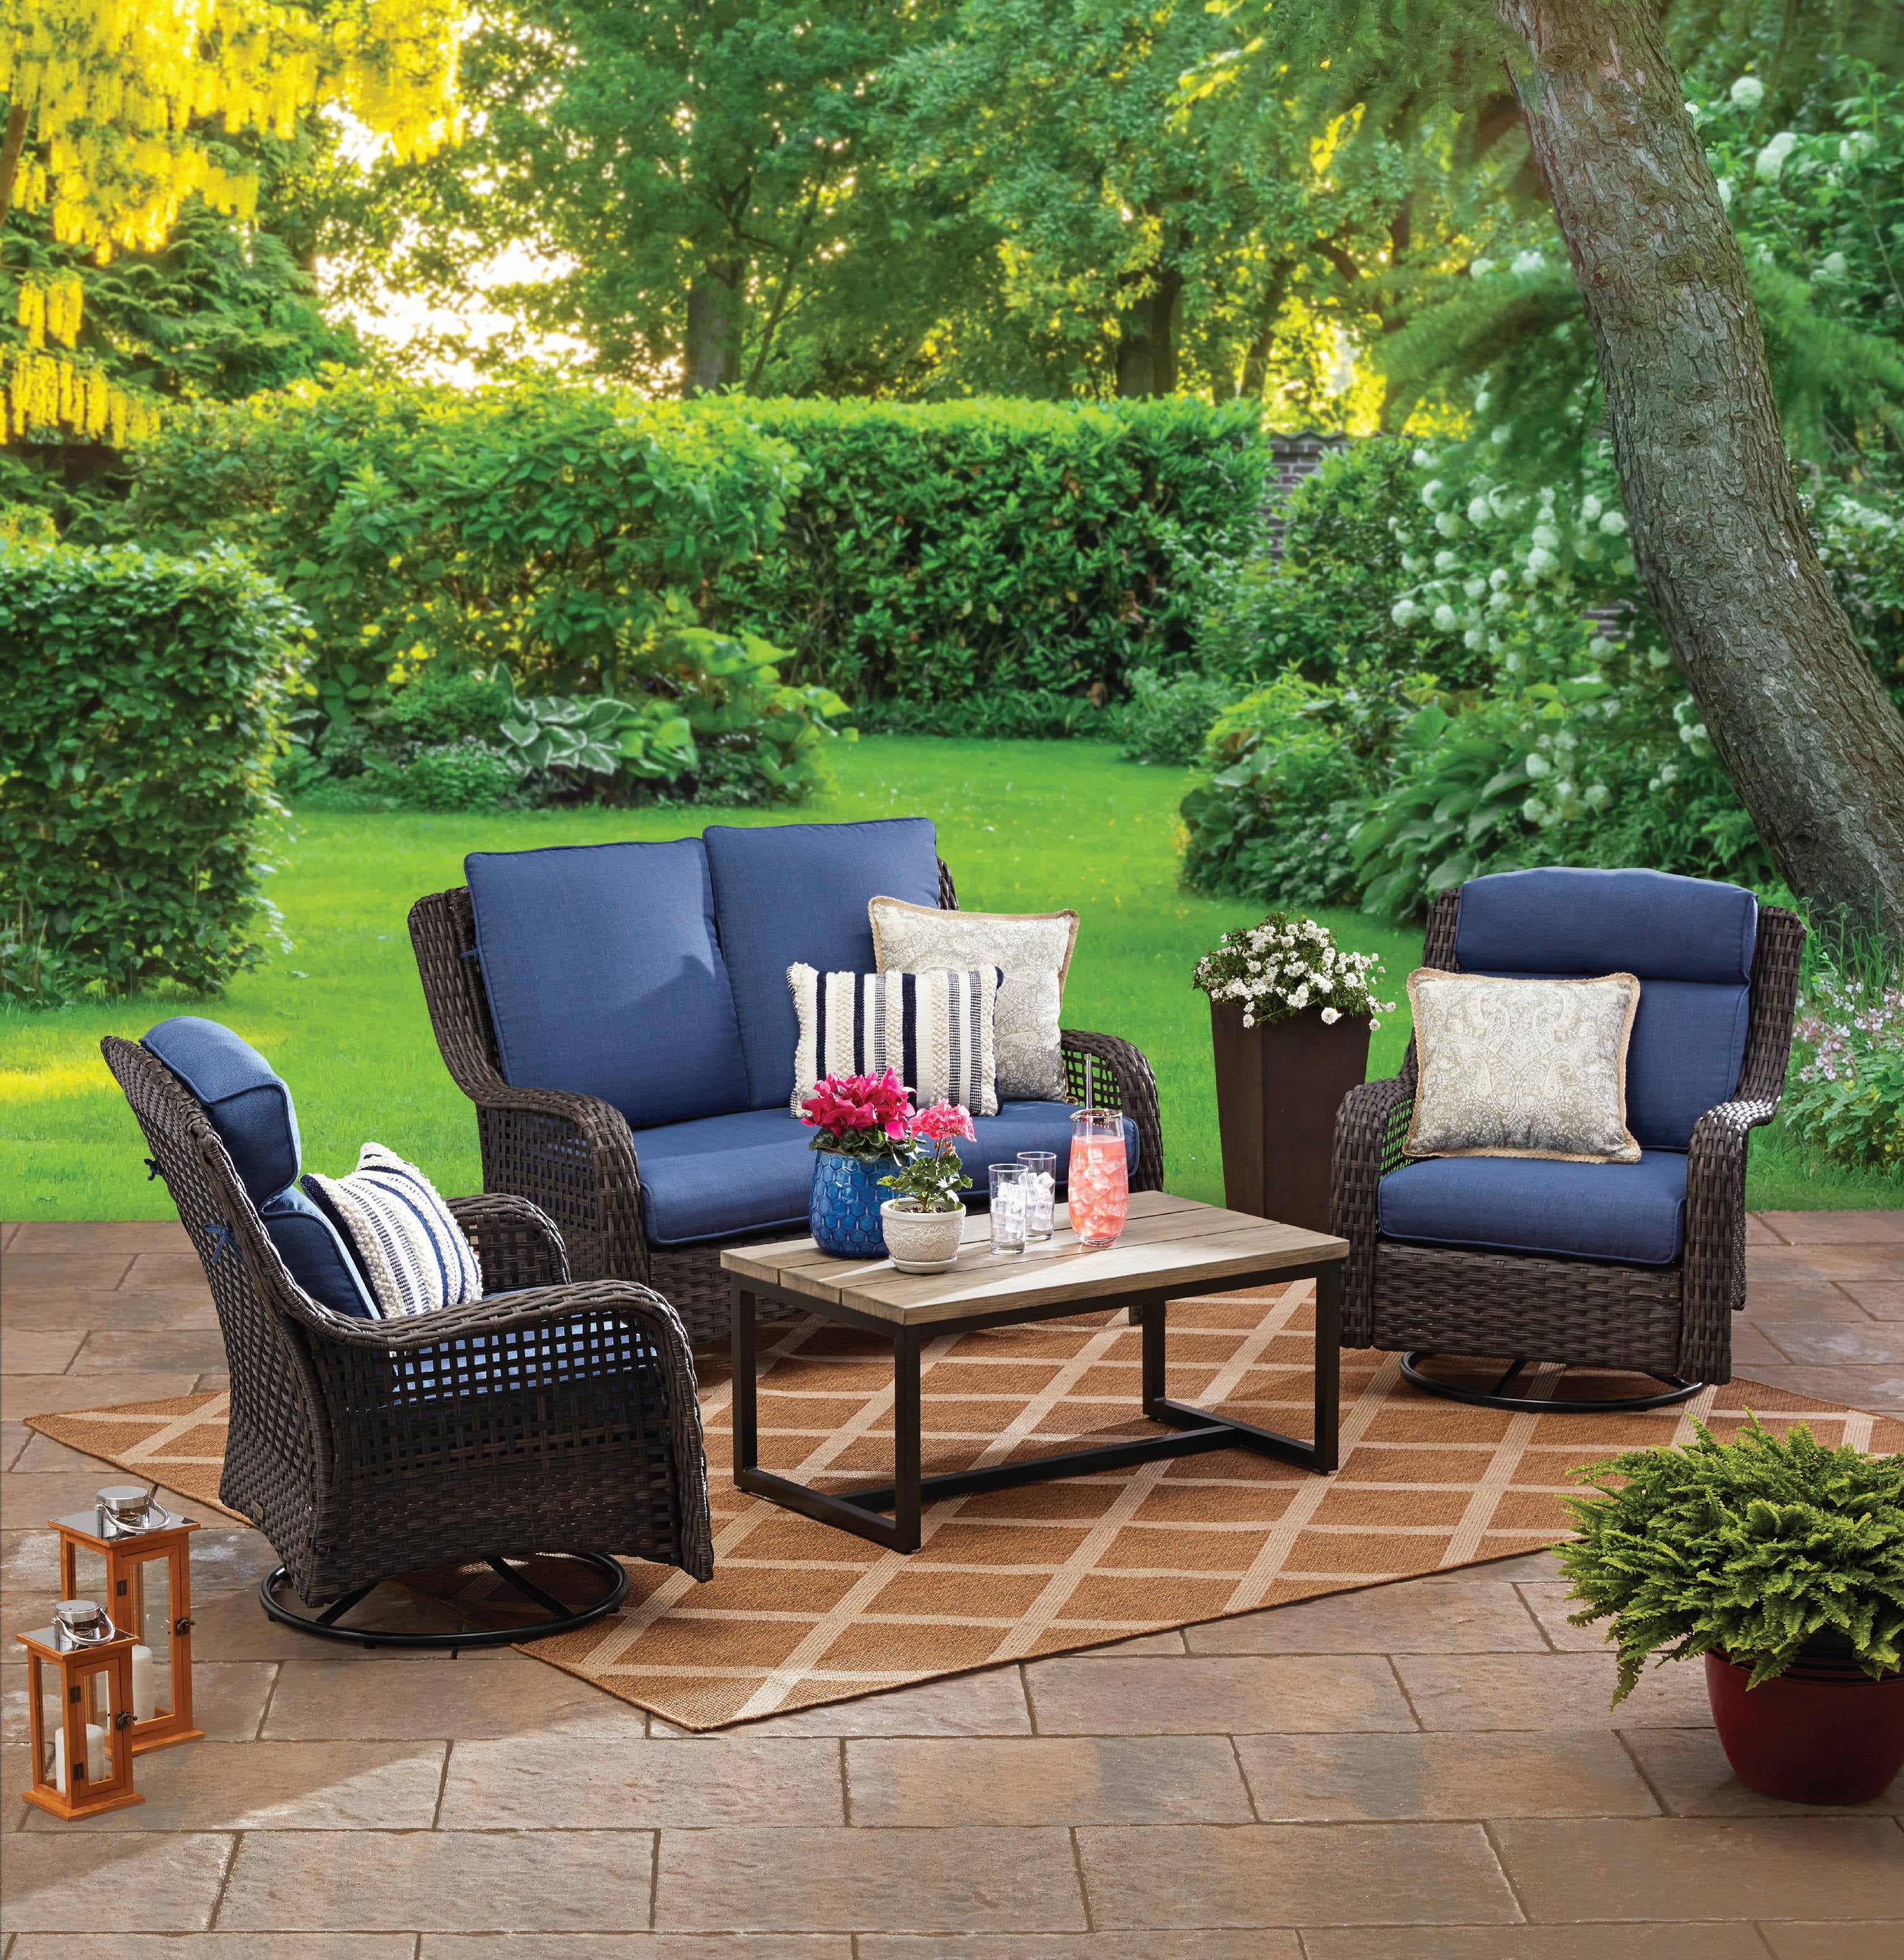 Outdoor Furniture and Fabric Cleaner & Protectant Sets